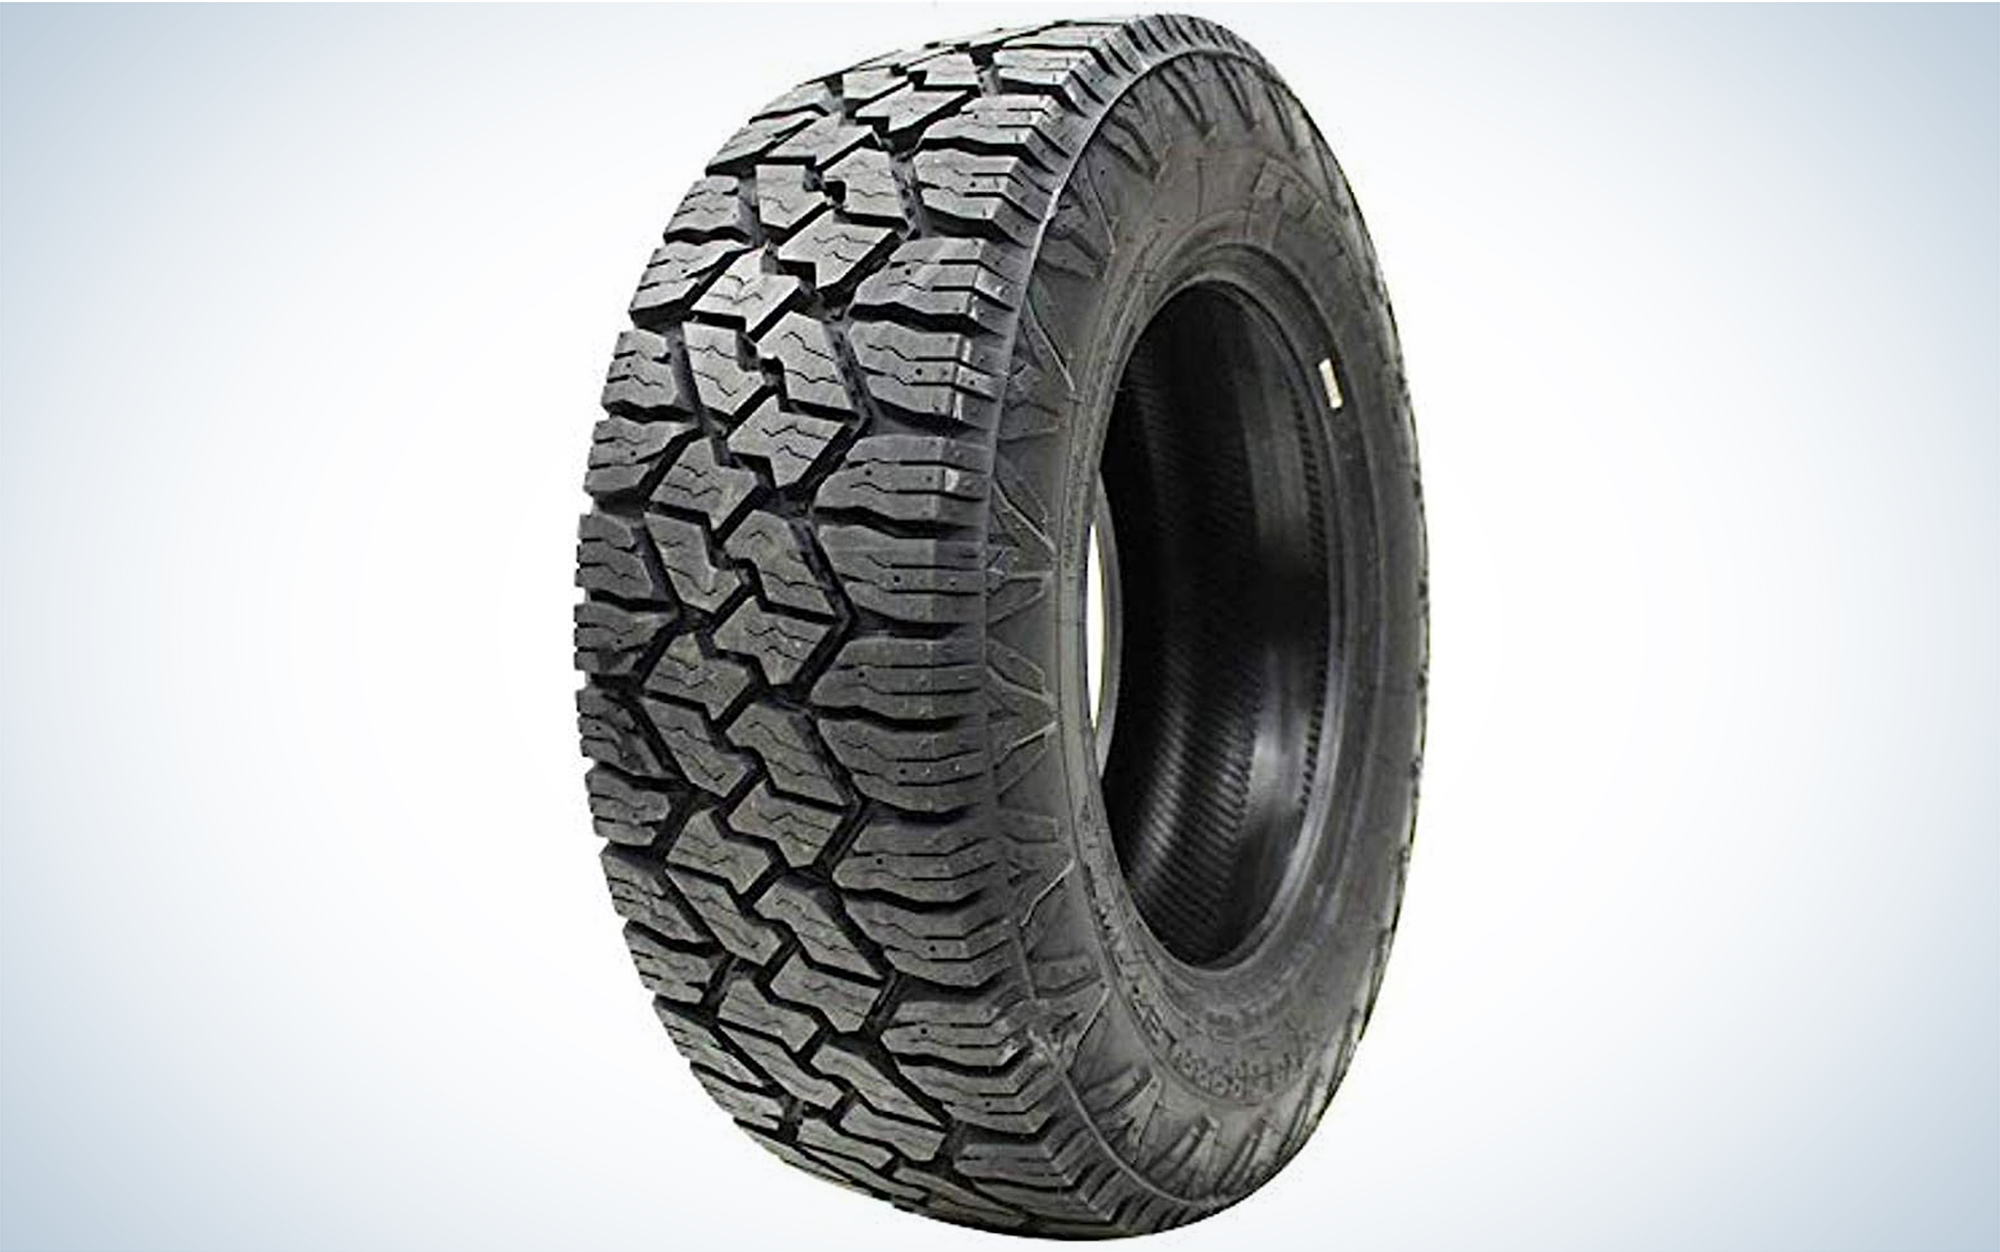 The Nitto Exo GrapplerÂ  is one of the best snow tires.